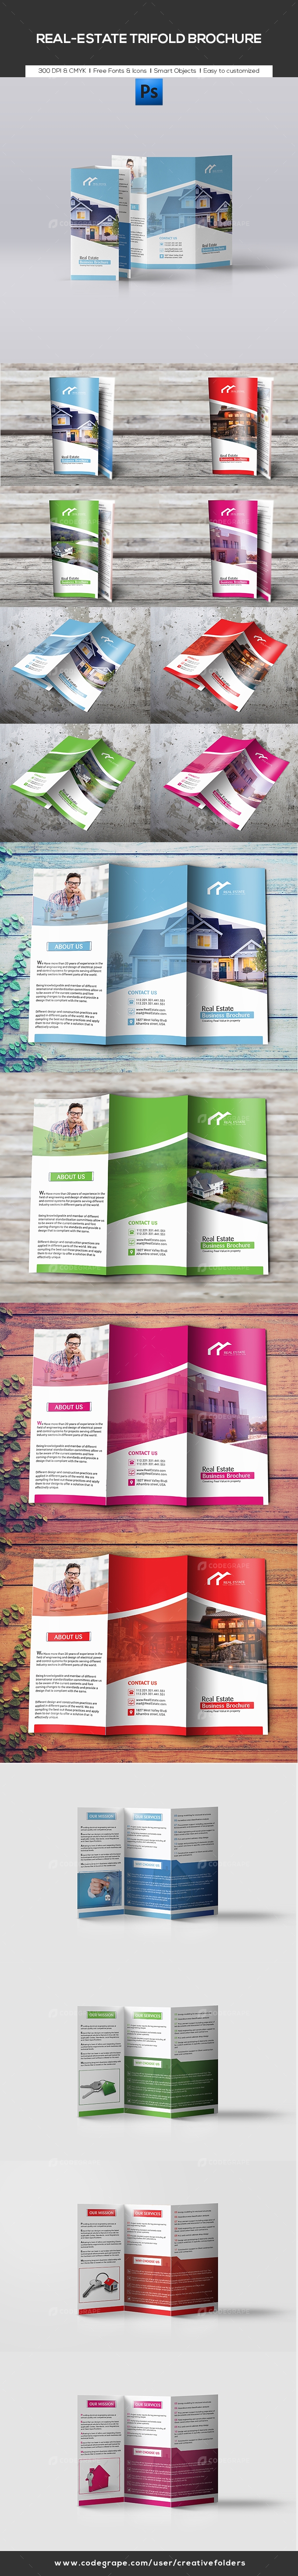 Real-Estate Trifold Brochure